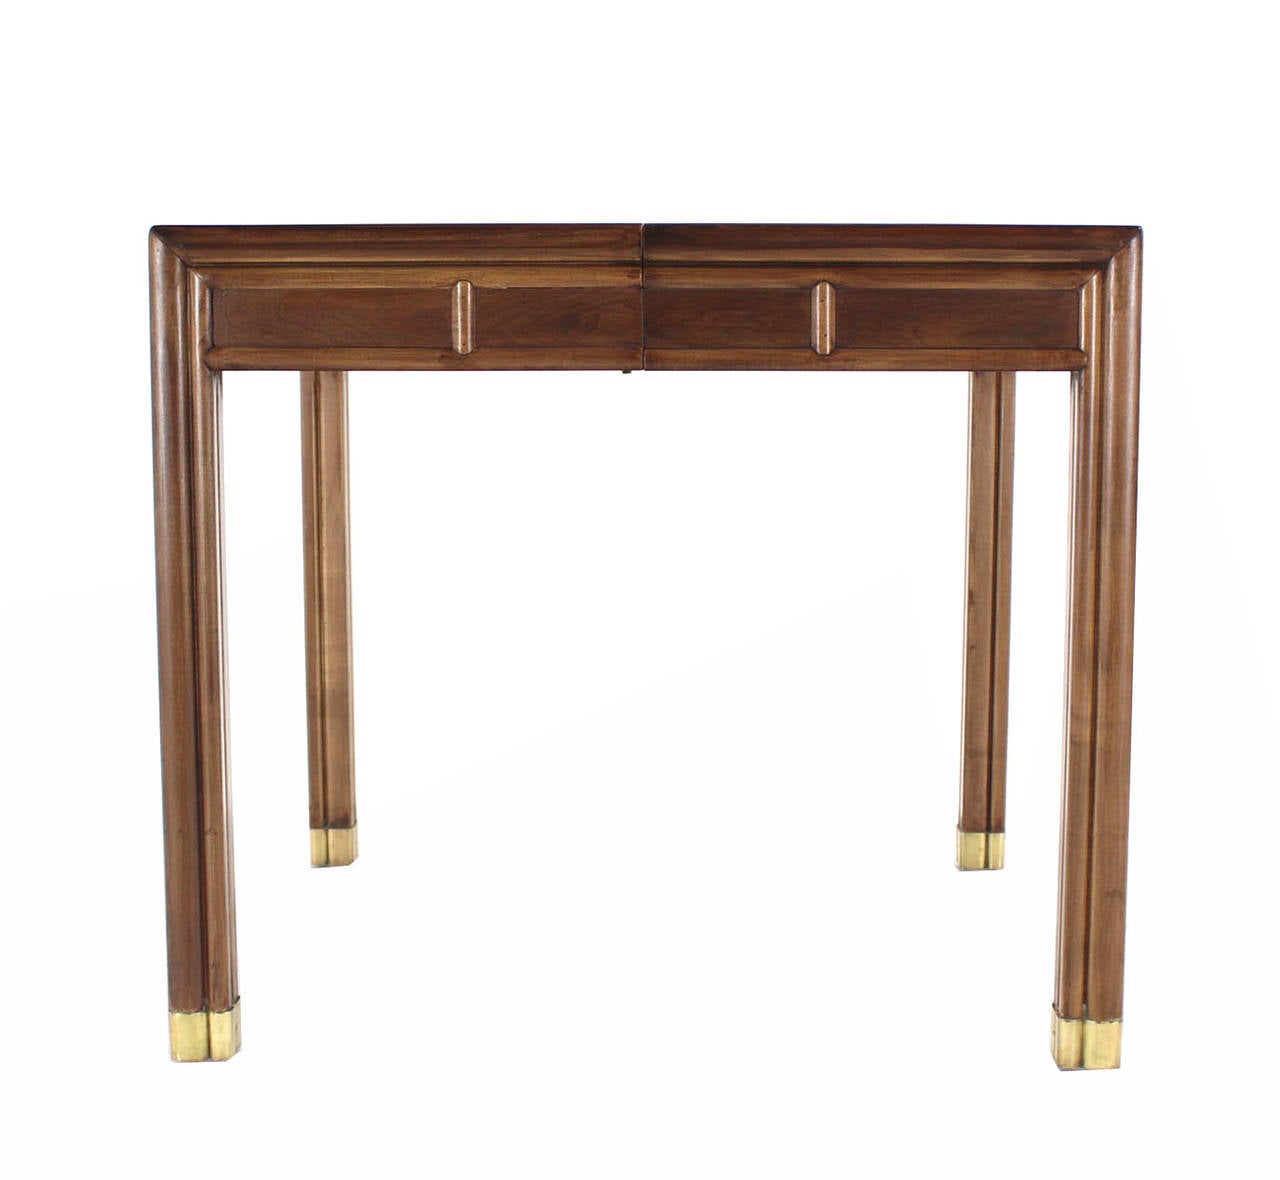 20th Century Henderson Square Dining Game Table with Built-In Pop Up Leaf